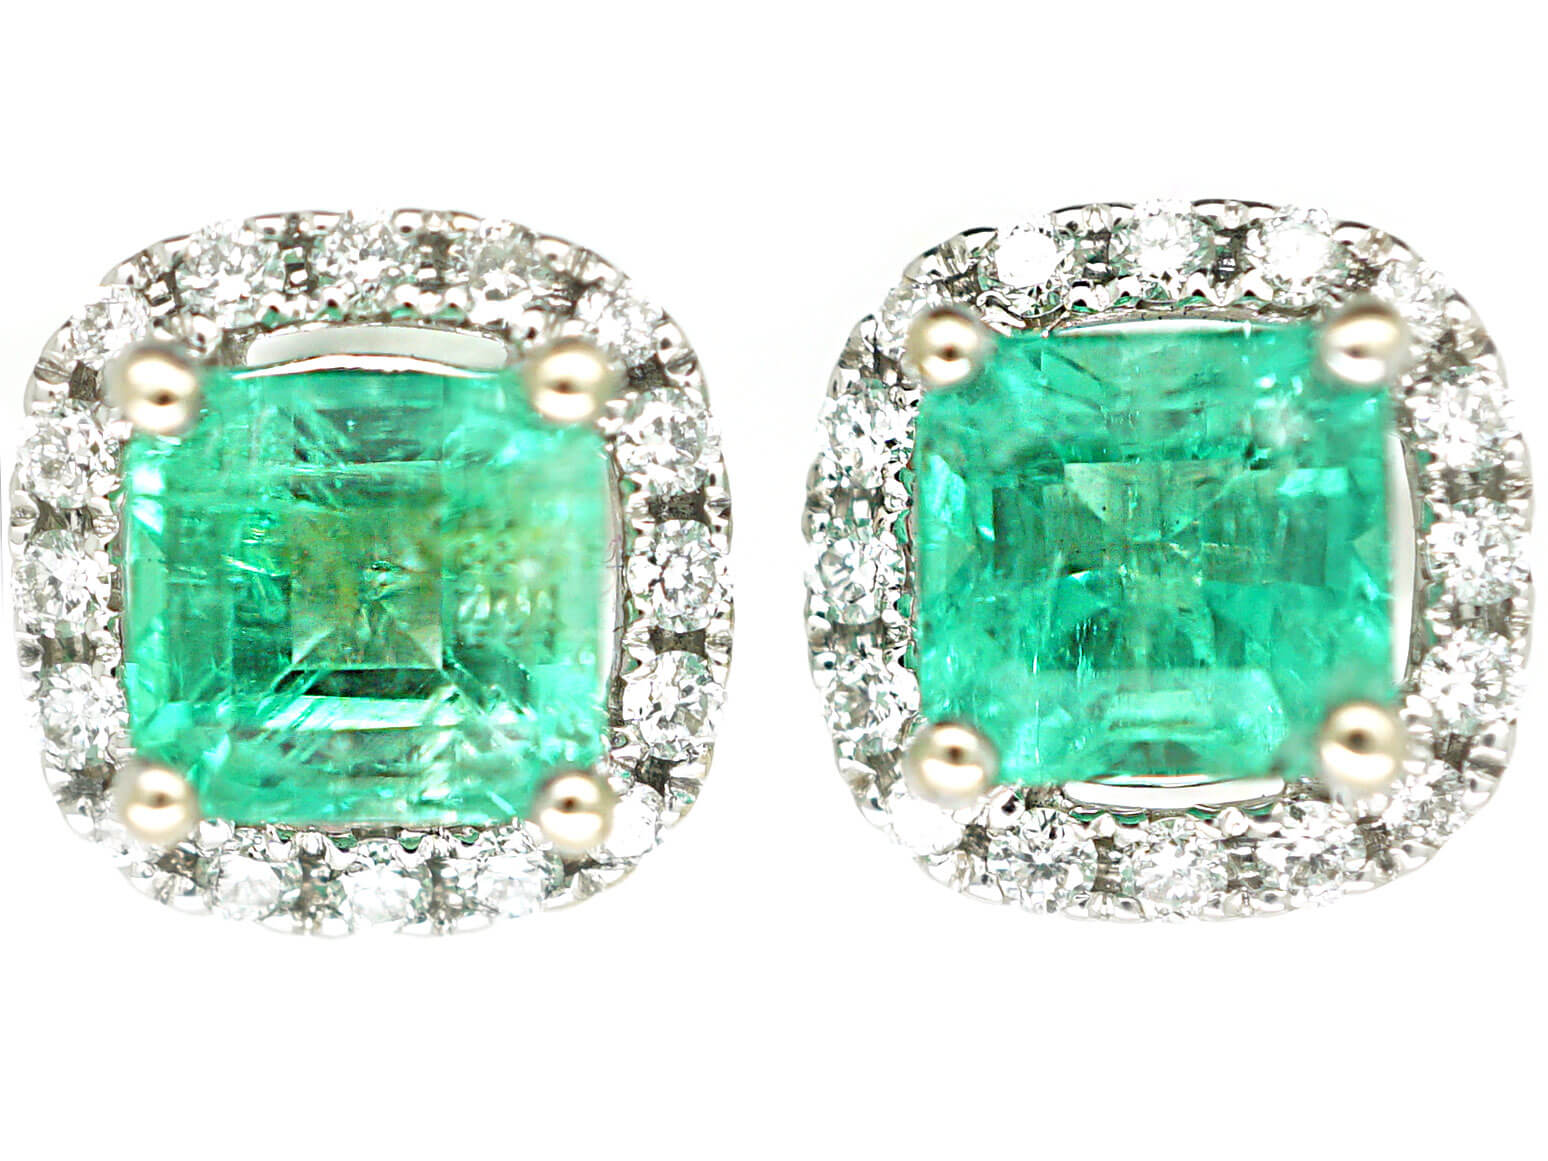 18ct White Gold Emerald & Diamond Earrings (229N) | The Antique ...